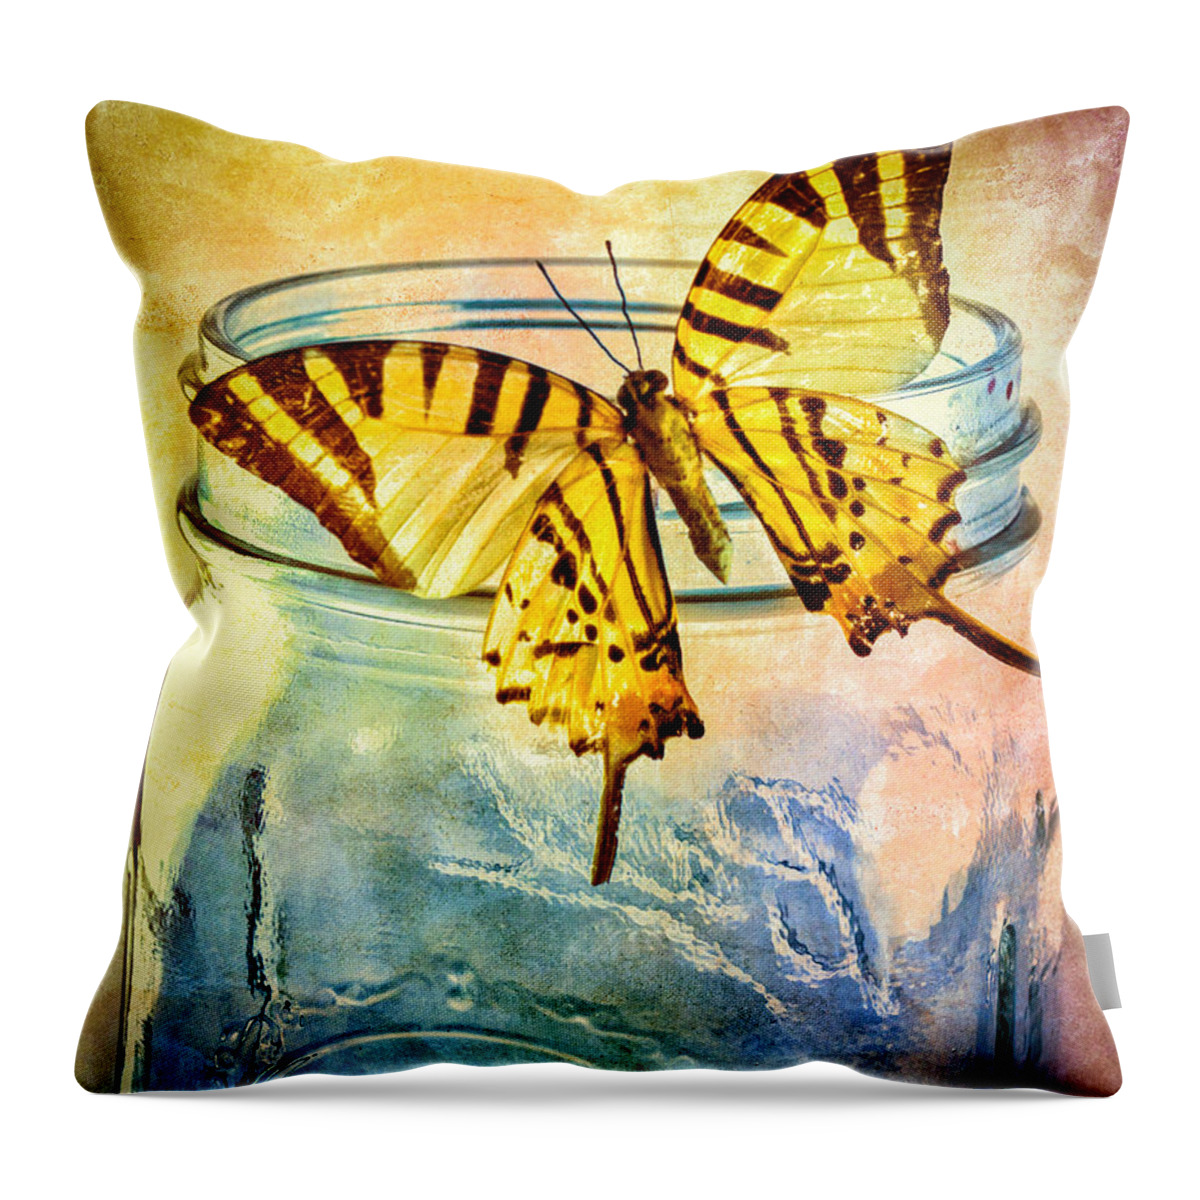 Blue Glass Throw Pillow featuring the photograph Butterfly Blue Glass Jar by Bob Orsillo